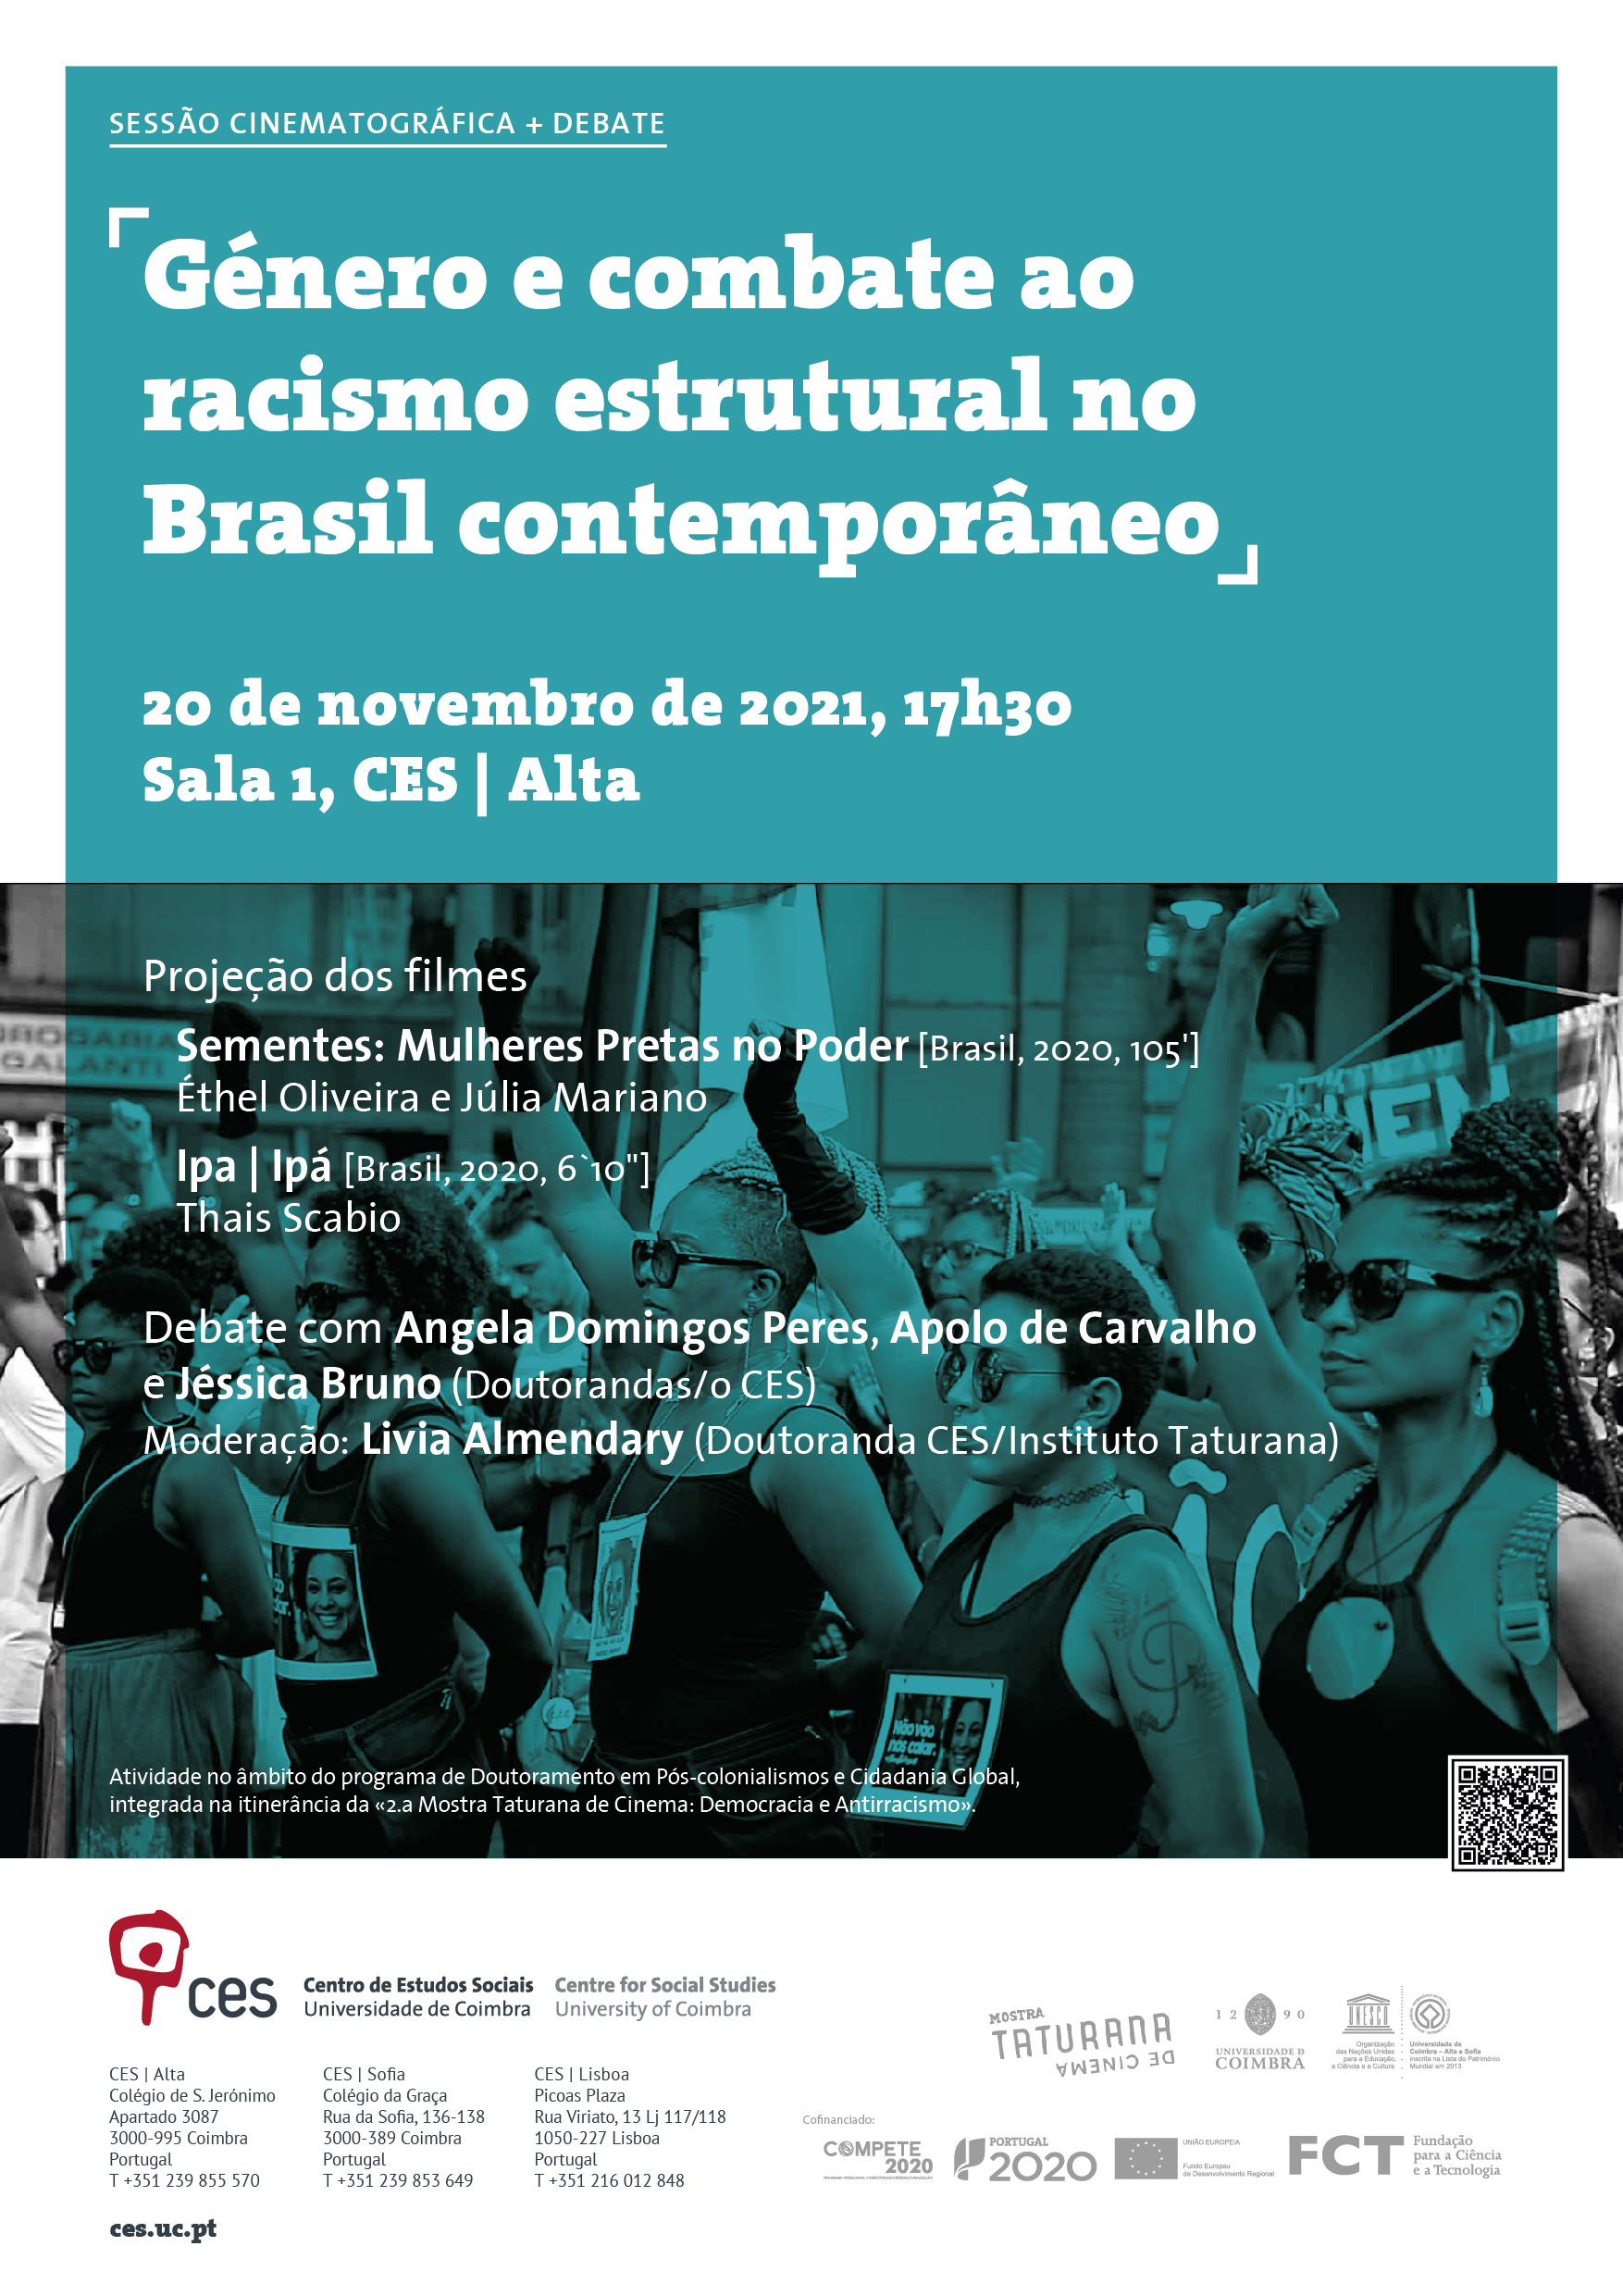 Gender and the struggle against structural racism in contemporary Brazil <span id="edit_35985"><script>$(function() { $('#edit_35985').load( "/myces/user/editobj.php?tipo=evento&id=35985" ); });</script></span>